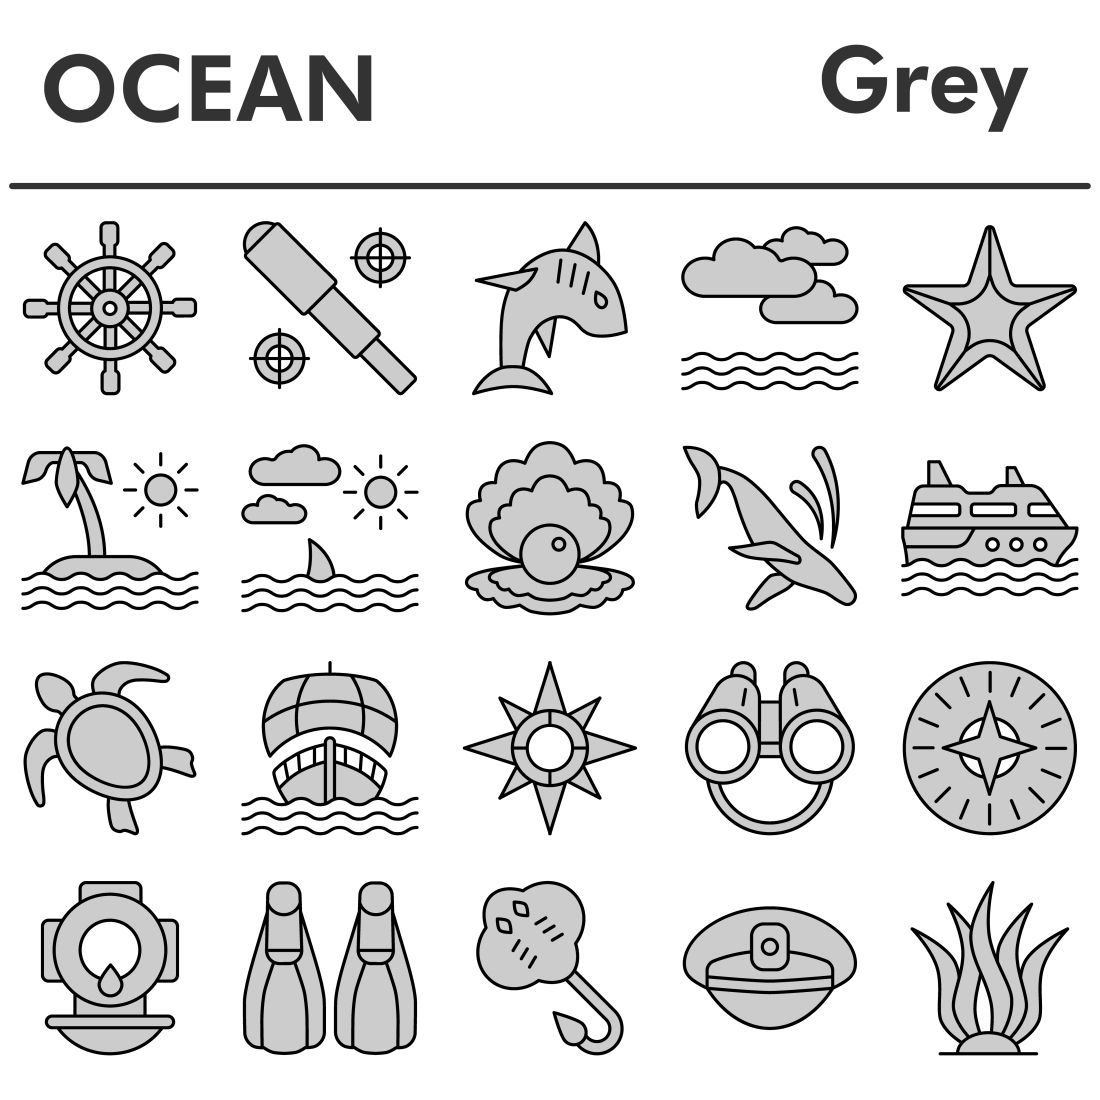 Ocean icons set, gray style cover image.